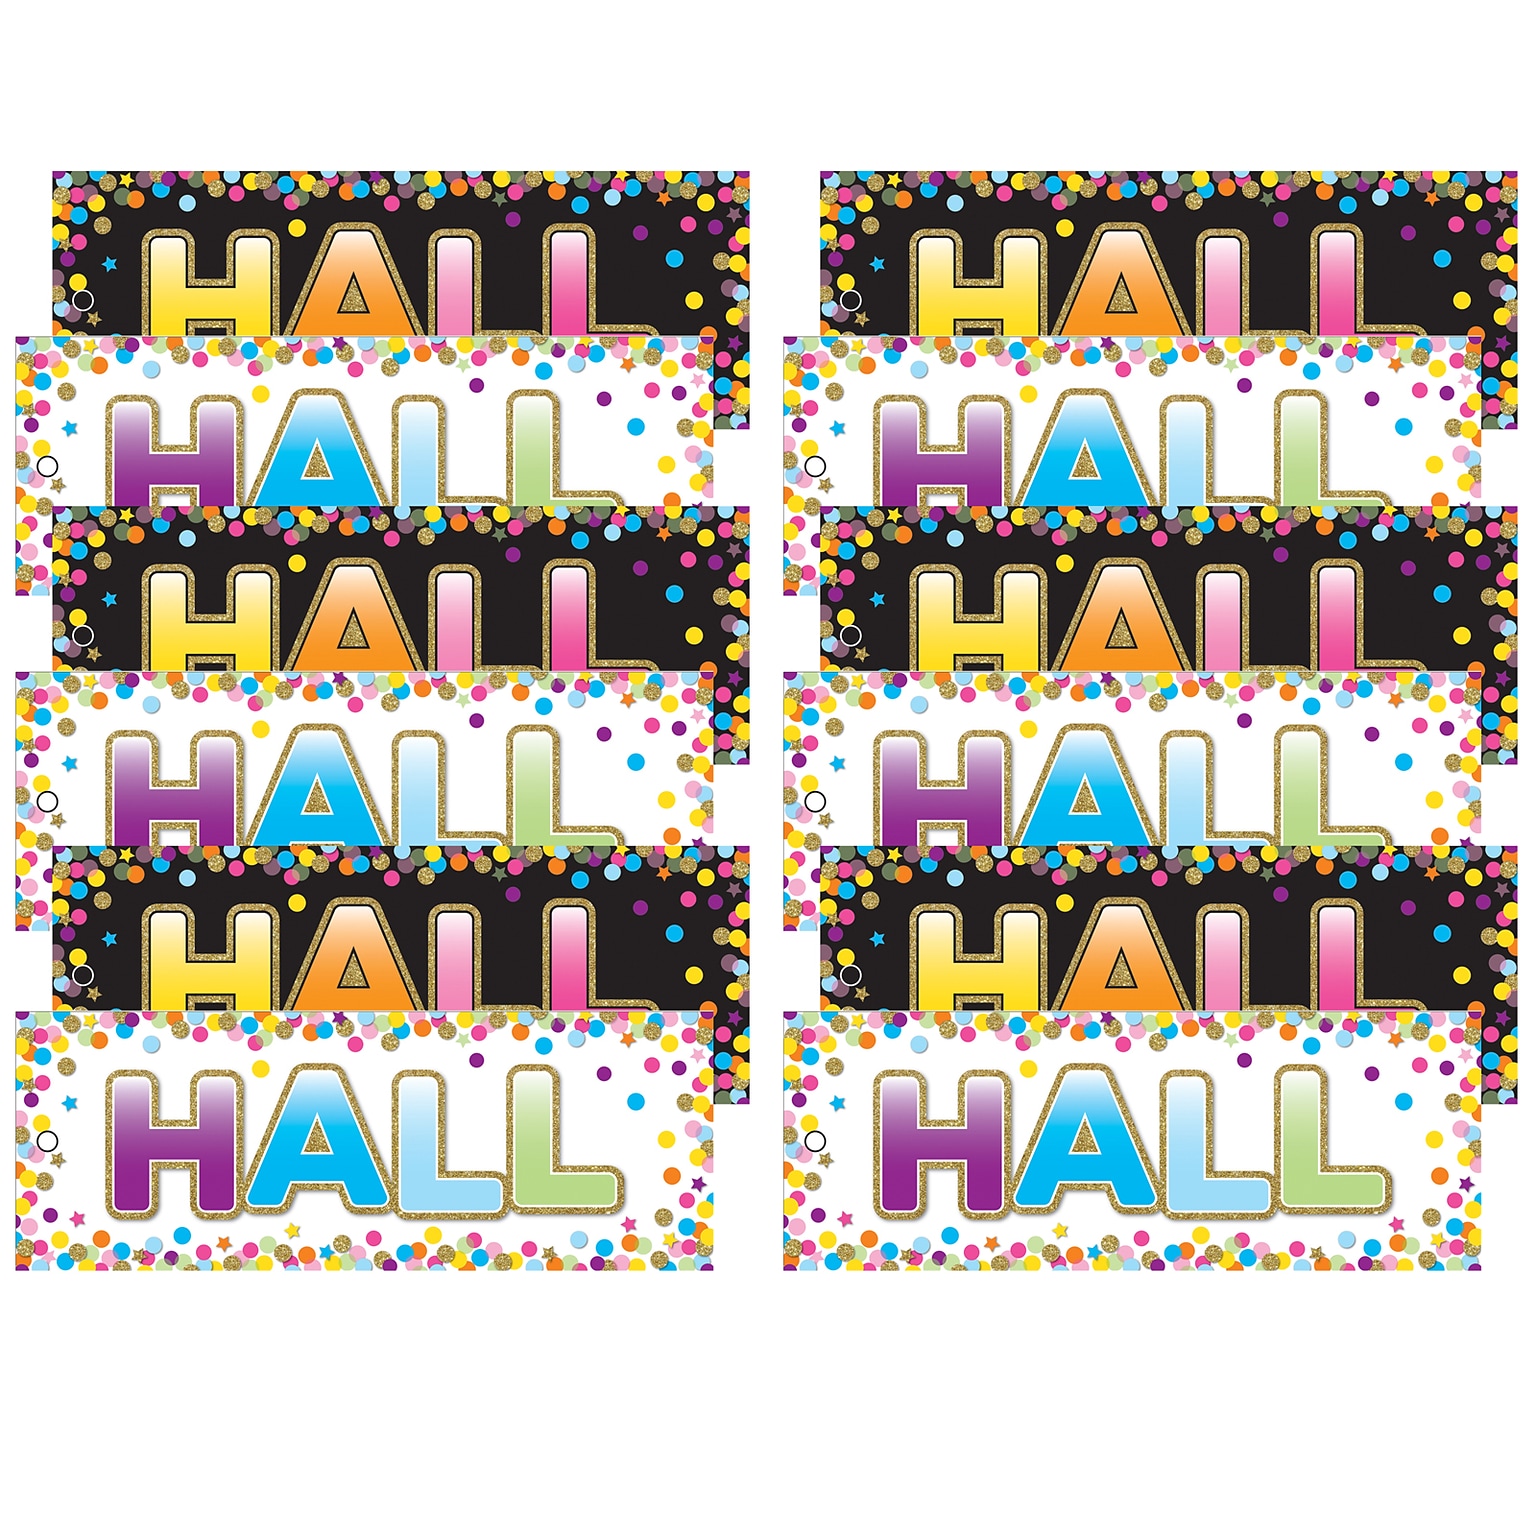 Ashley Productions Laminated Double-Sided Hall Passes, 9 x 3.5, Confetti Hall Pass, Pack of 6 (ASH10749-6)